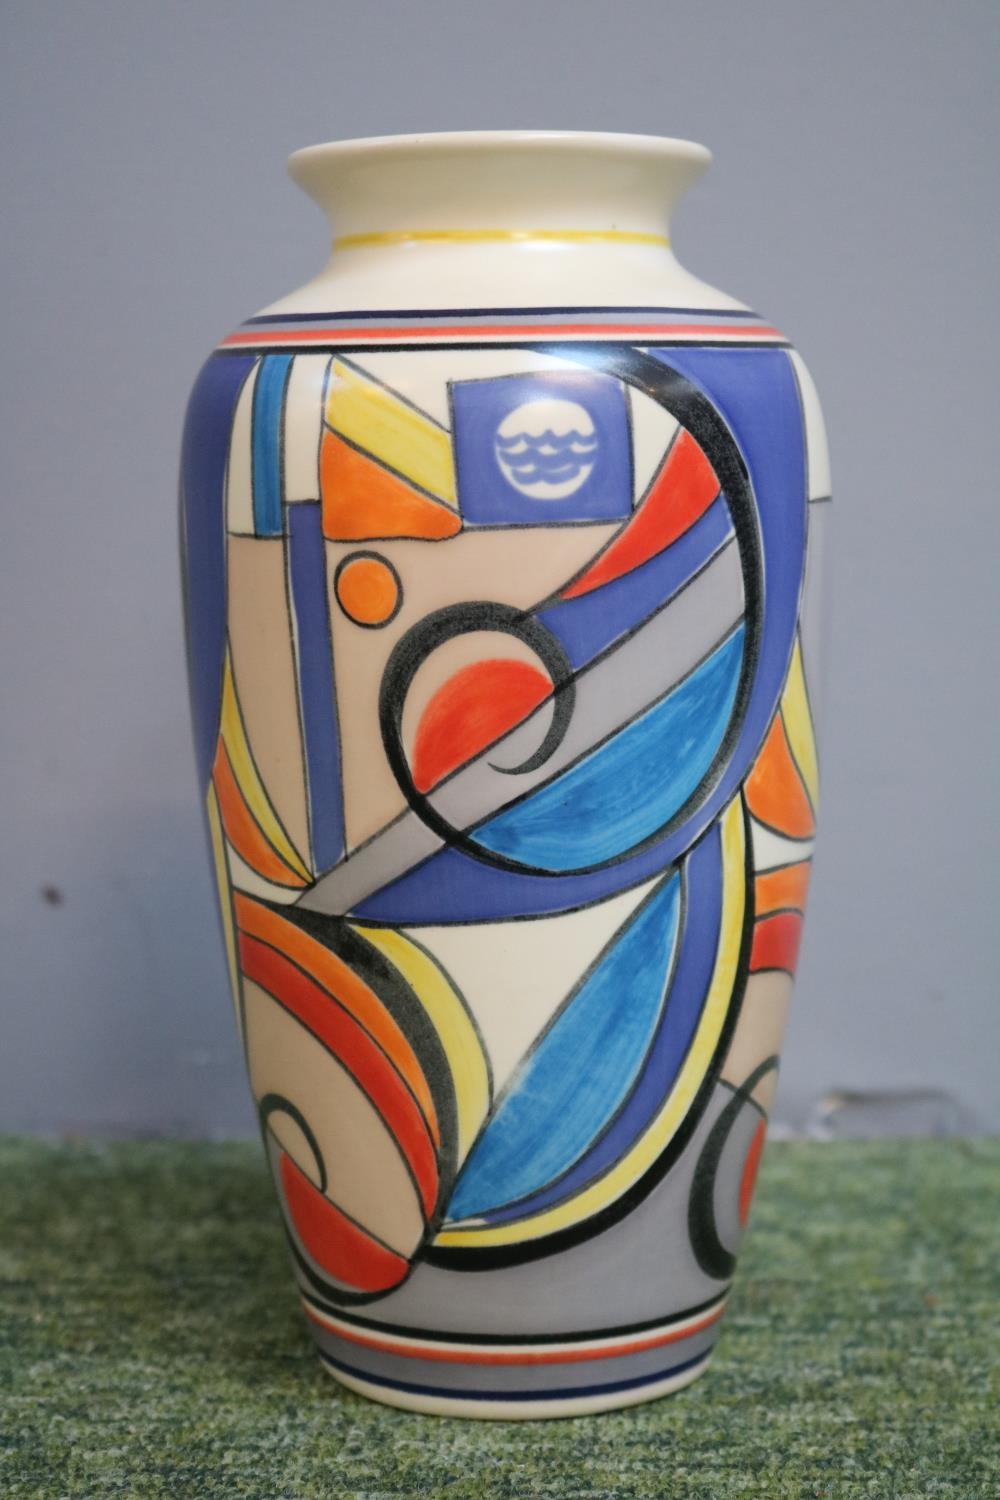 Poole Pottery Geometric Art Deco design vase signed by Karen Brown dated 1999. 21cm in Height - Image 2 of 4